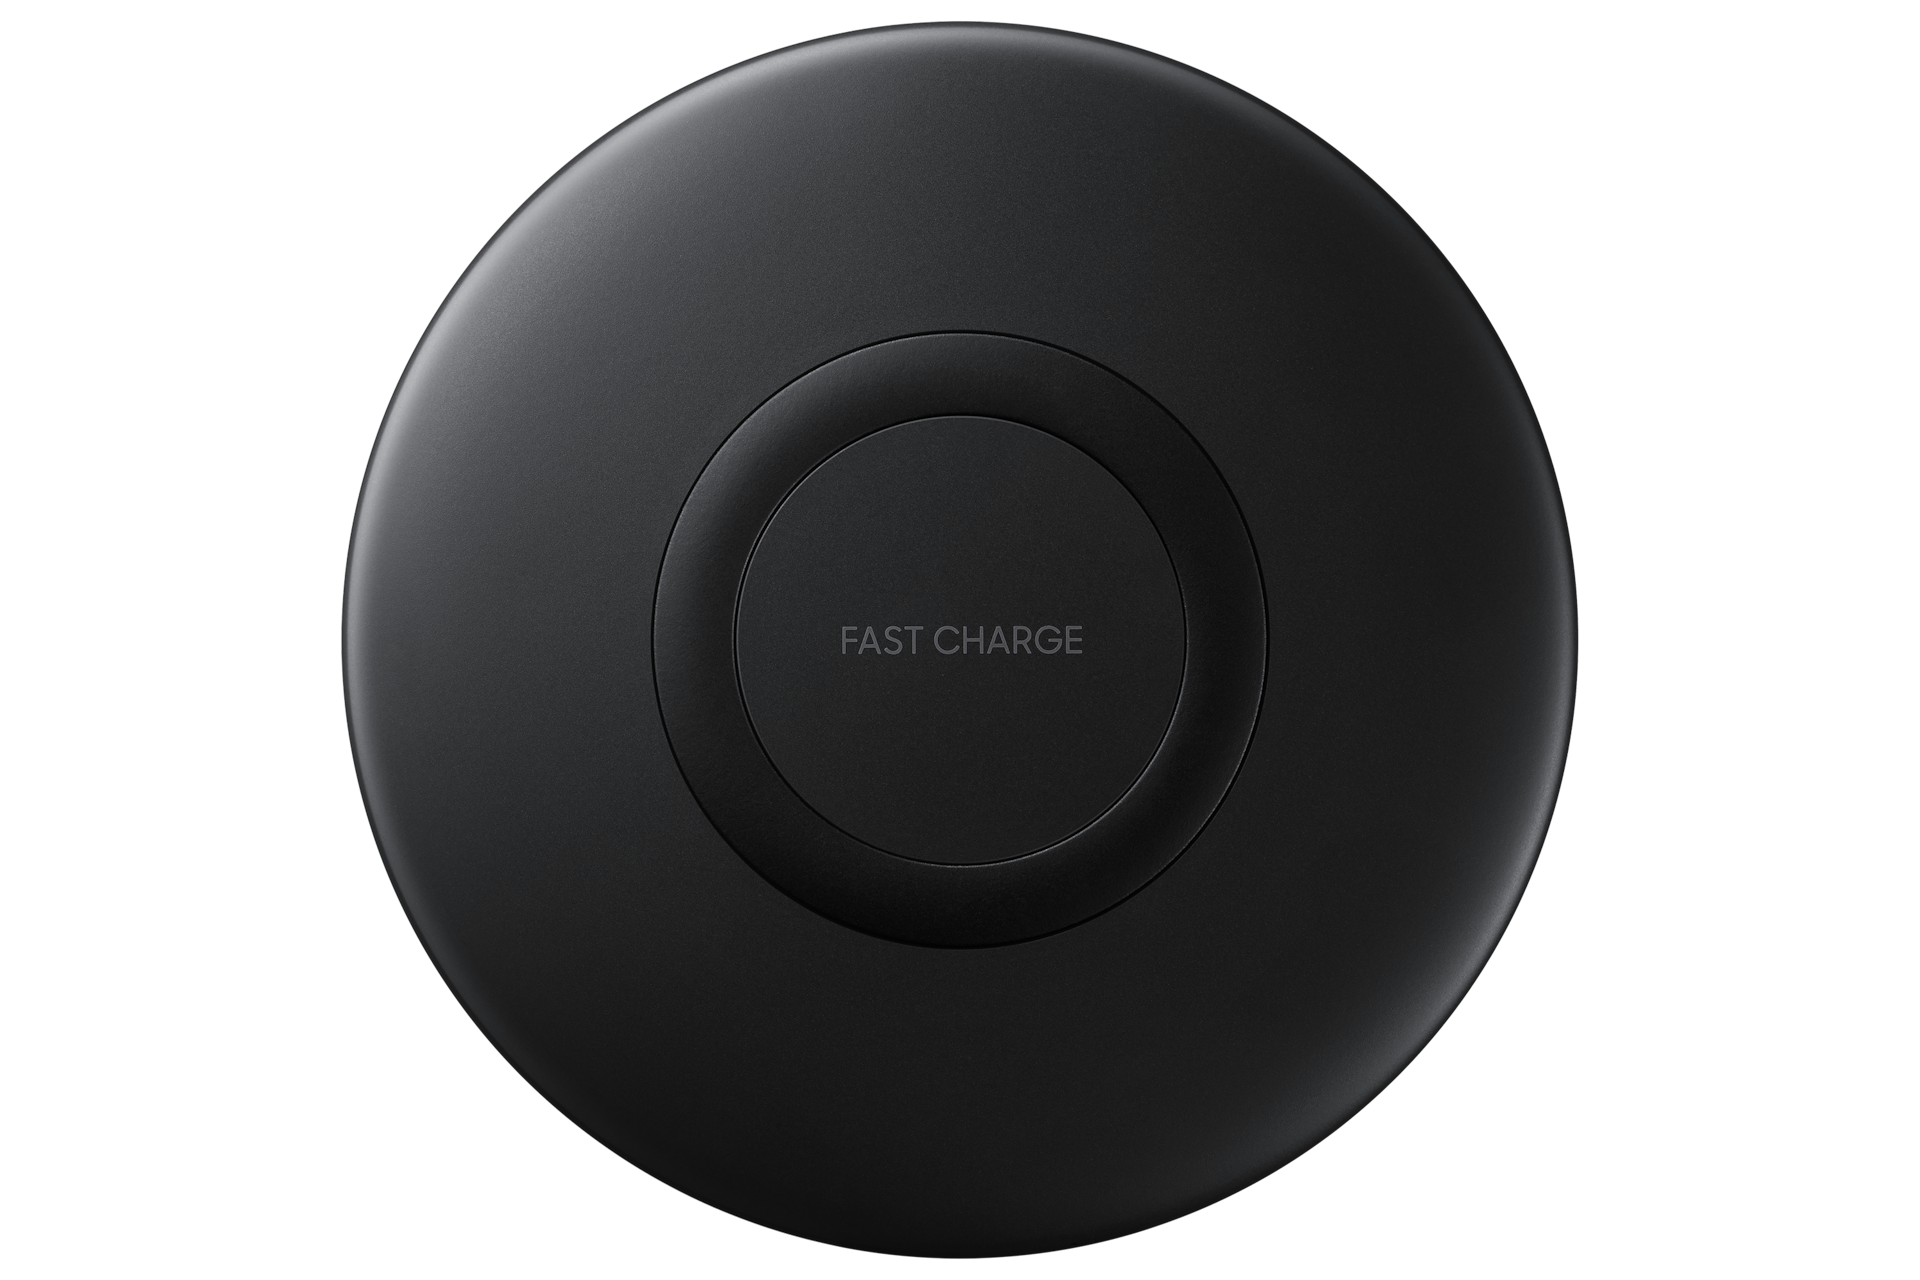 https://images.samsung.com/is/image/samsung/at-wireless-charger-pad-p1100-ep-p1100bbegww-frontblack-121189081?$650_519_PNG$